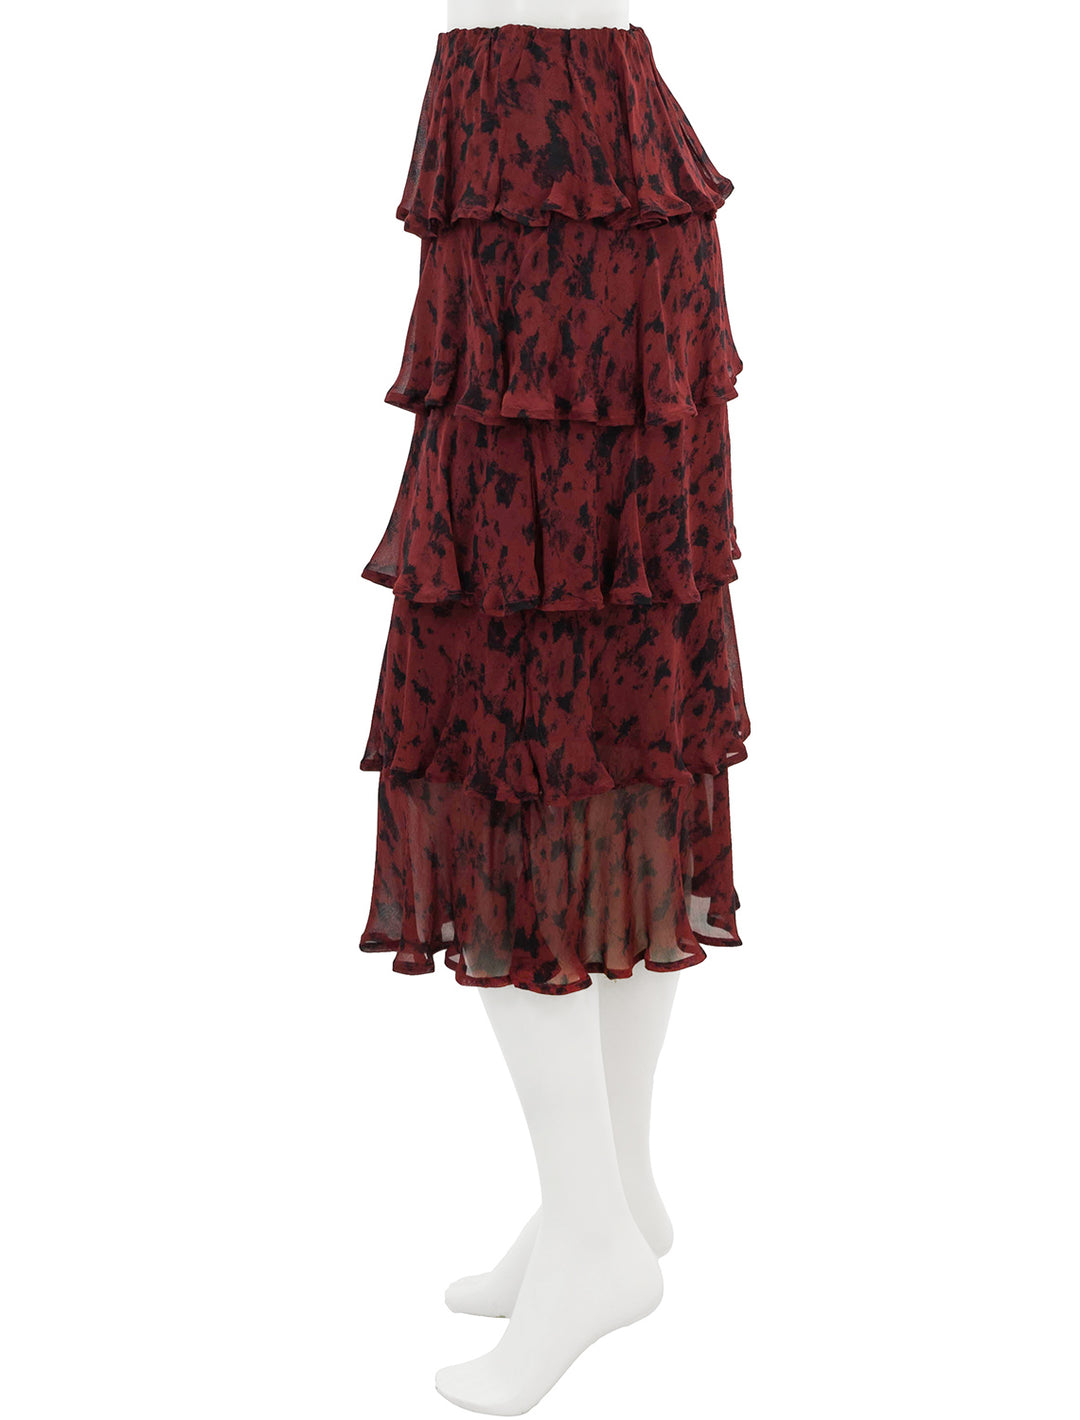 Side view of GANNI's tiered skirt in syrah.